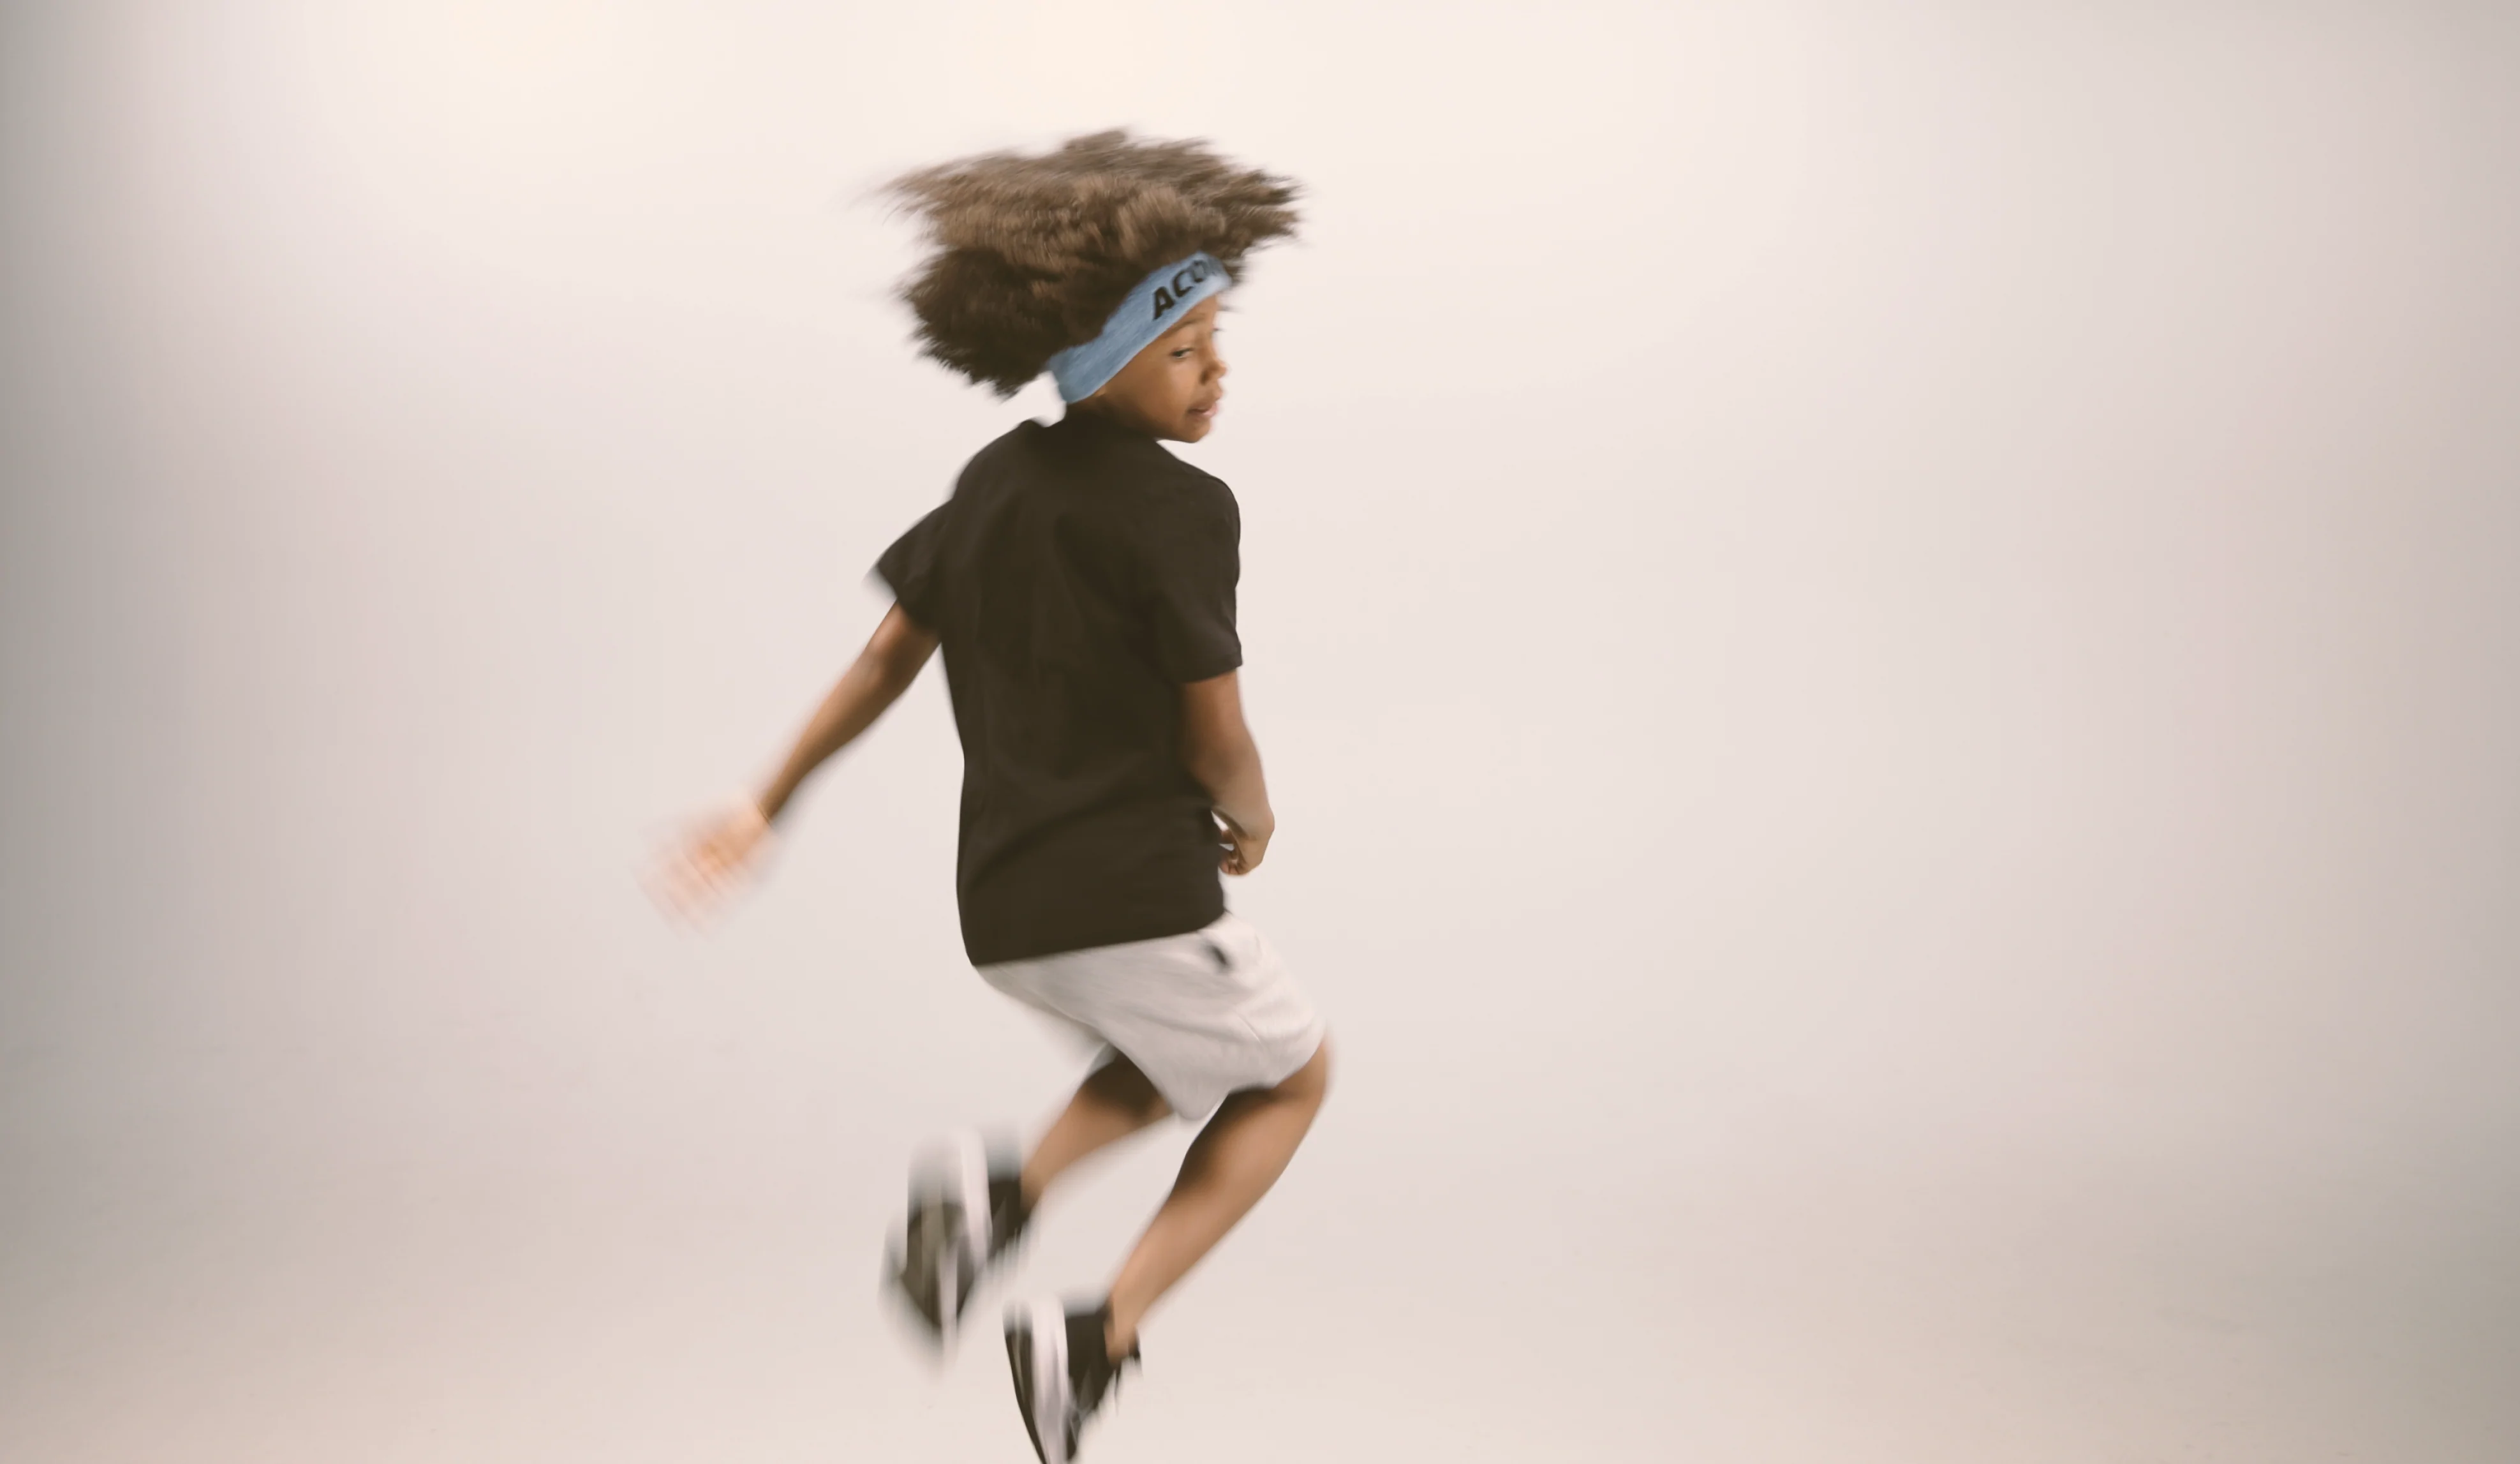 A jumping kid wearing an Acon headband, black t-shirt, white shorts and sneakers. Image is taken against beige background 